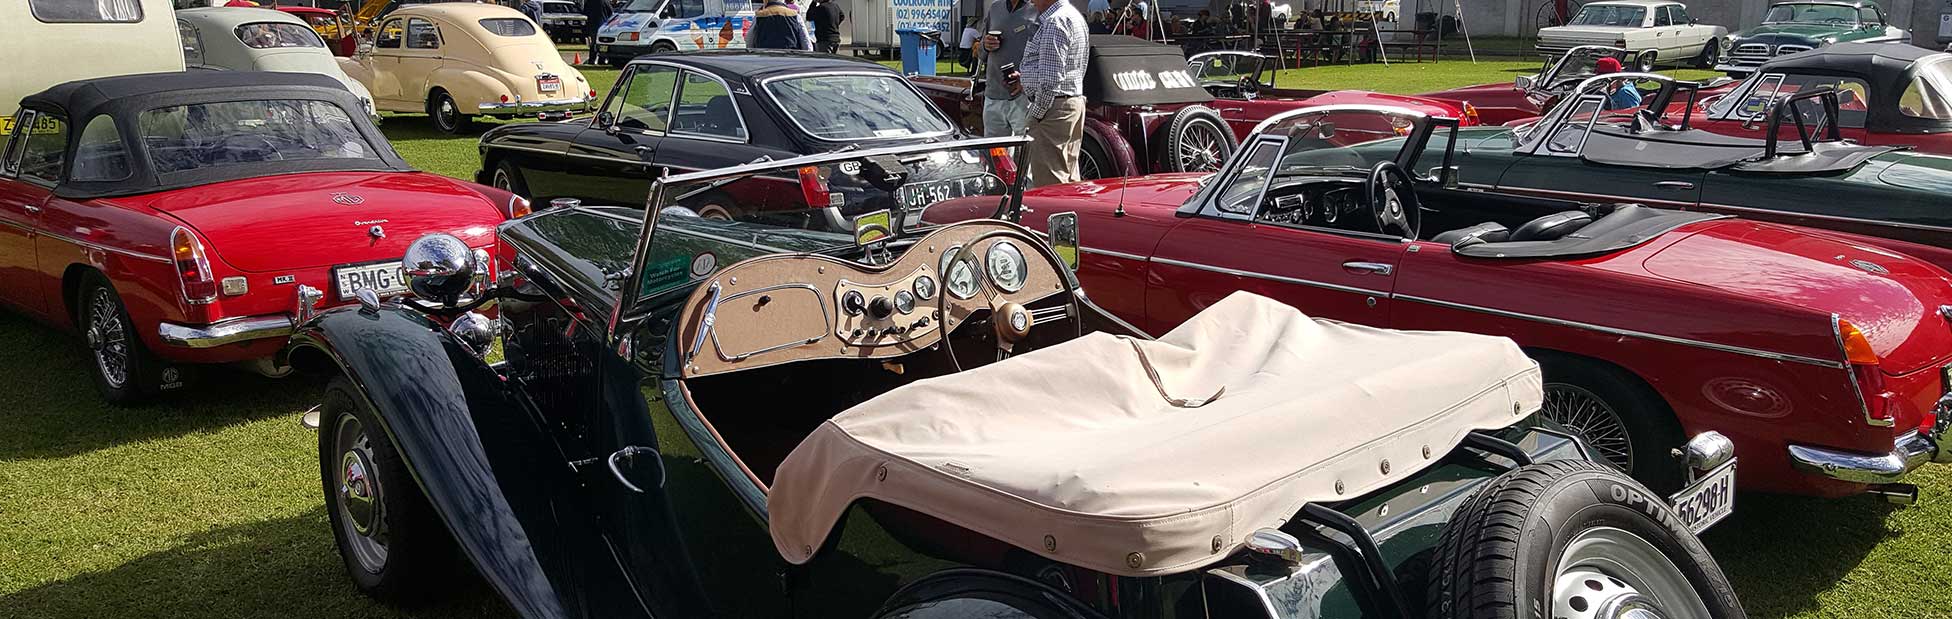 Vintage green convertible automobile surrounded by other display cars